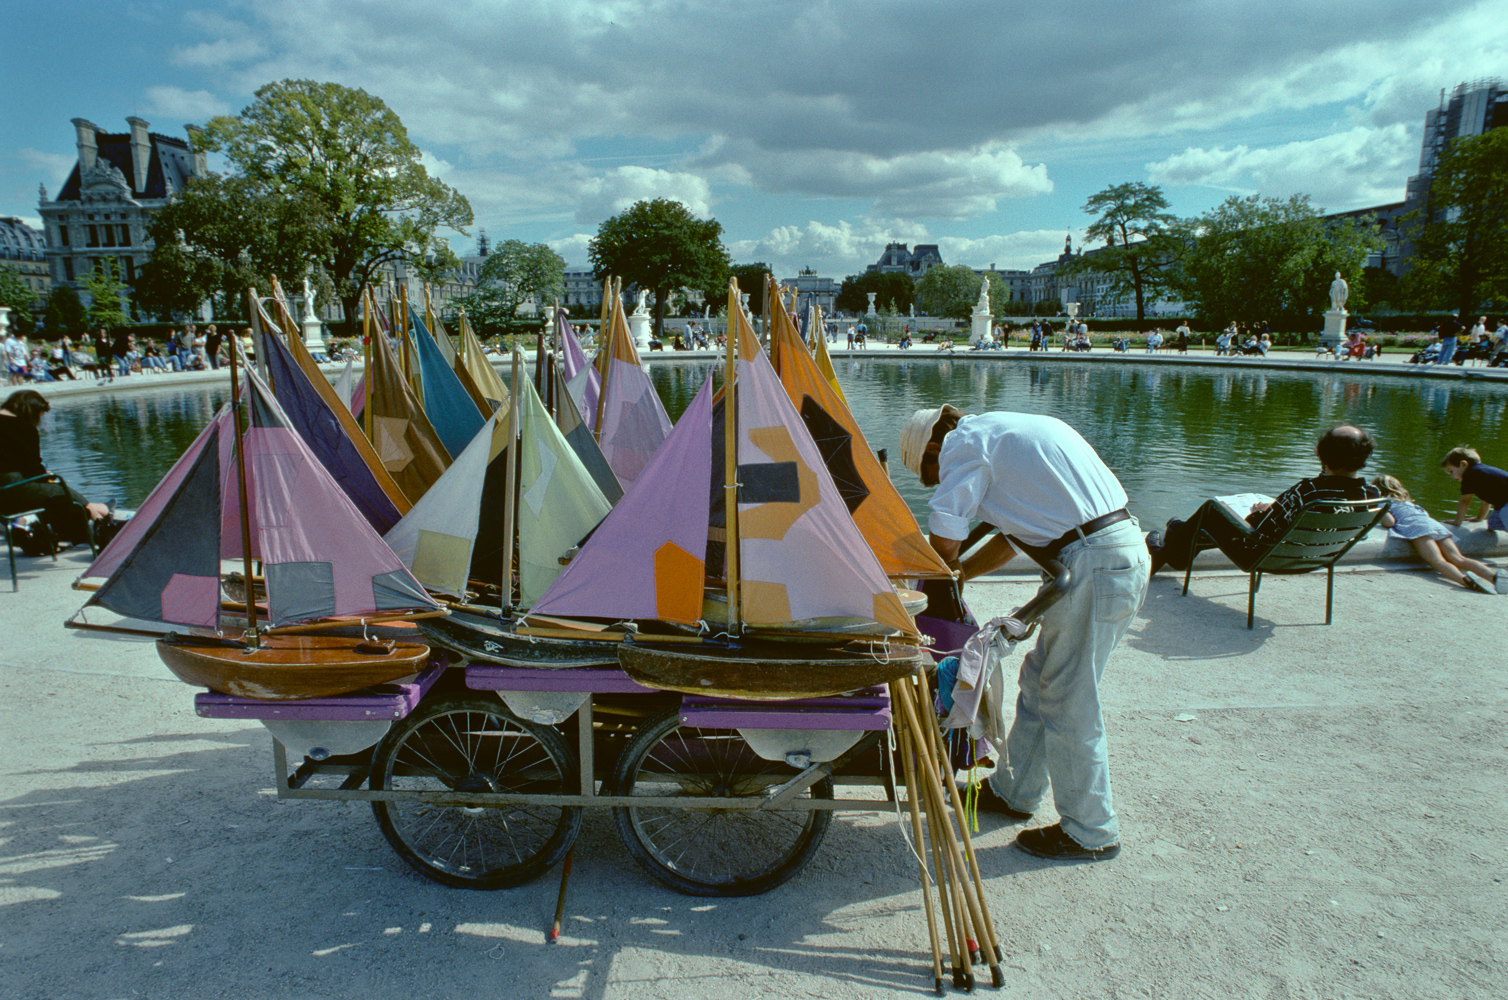 The vintage toy boat vendor with his cart in front of the the pond in the Jardin du Luxembourg.